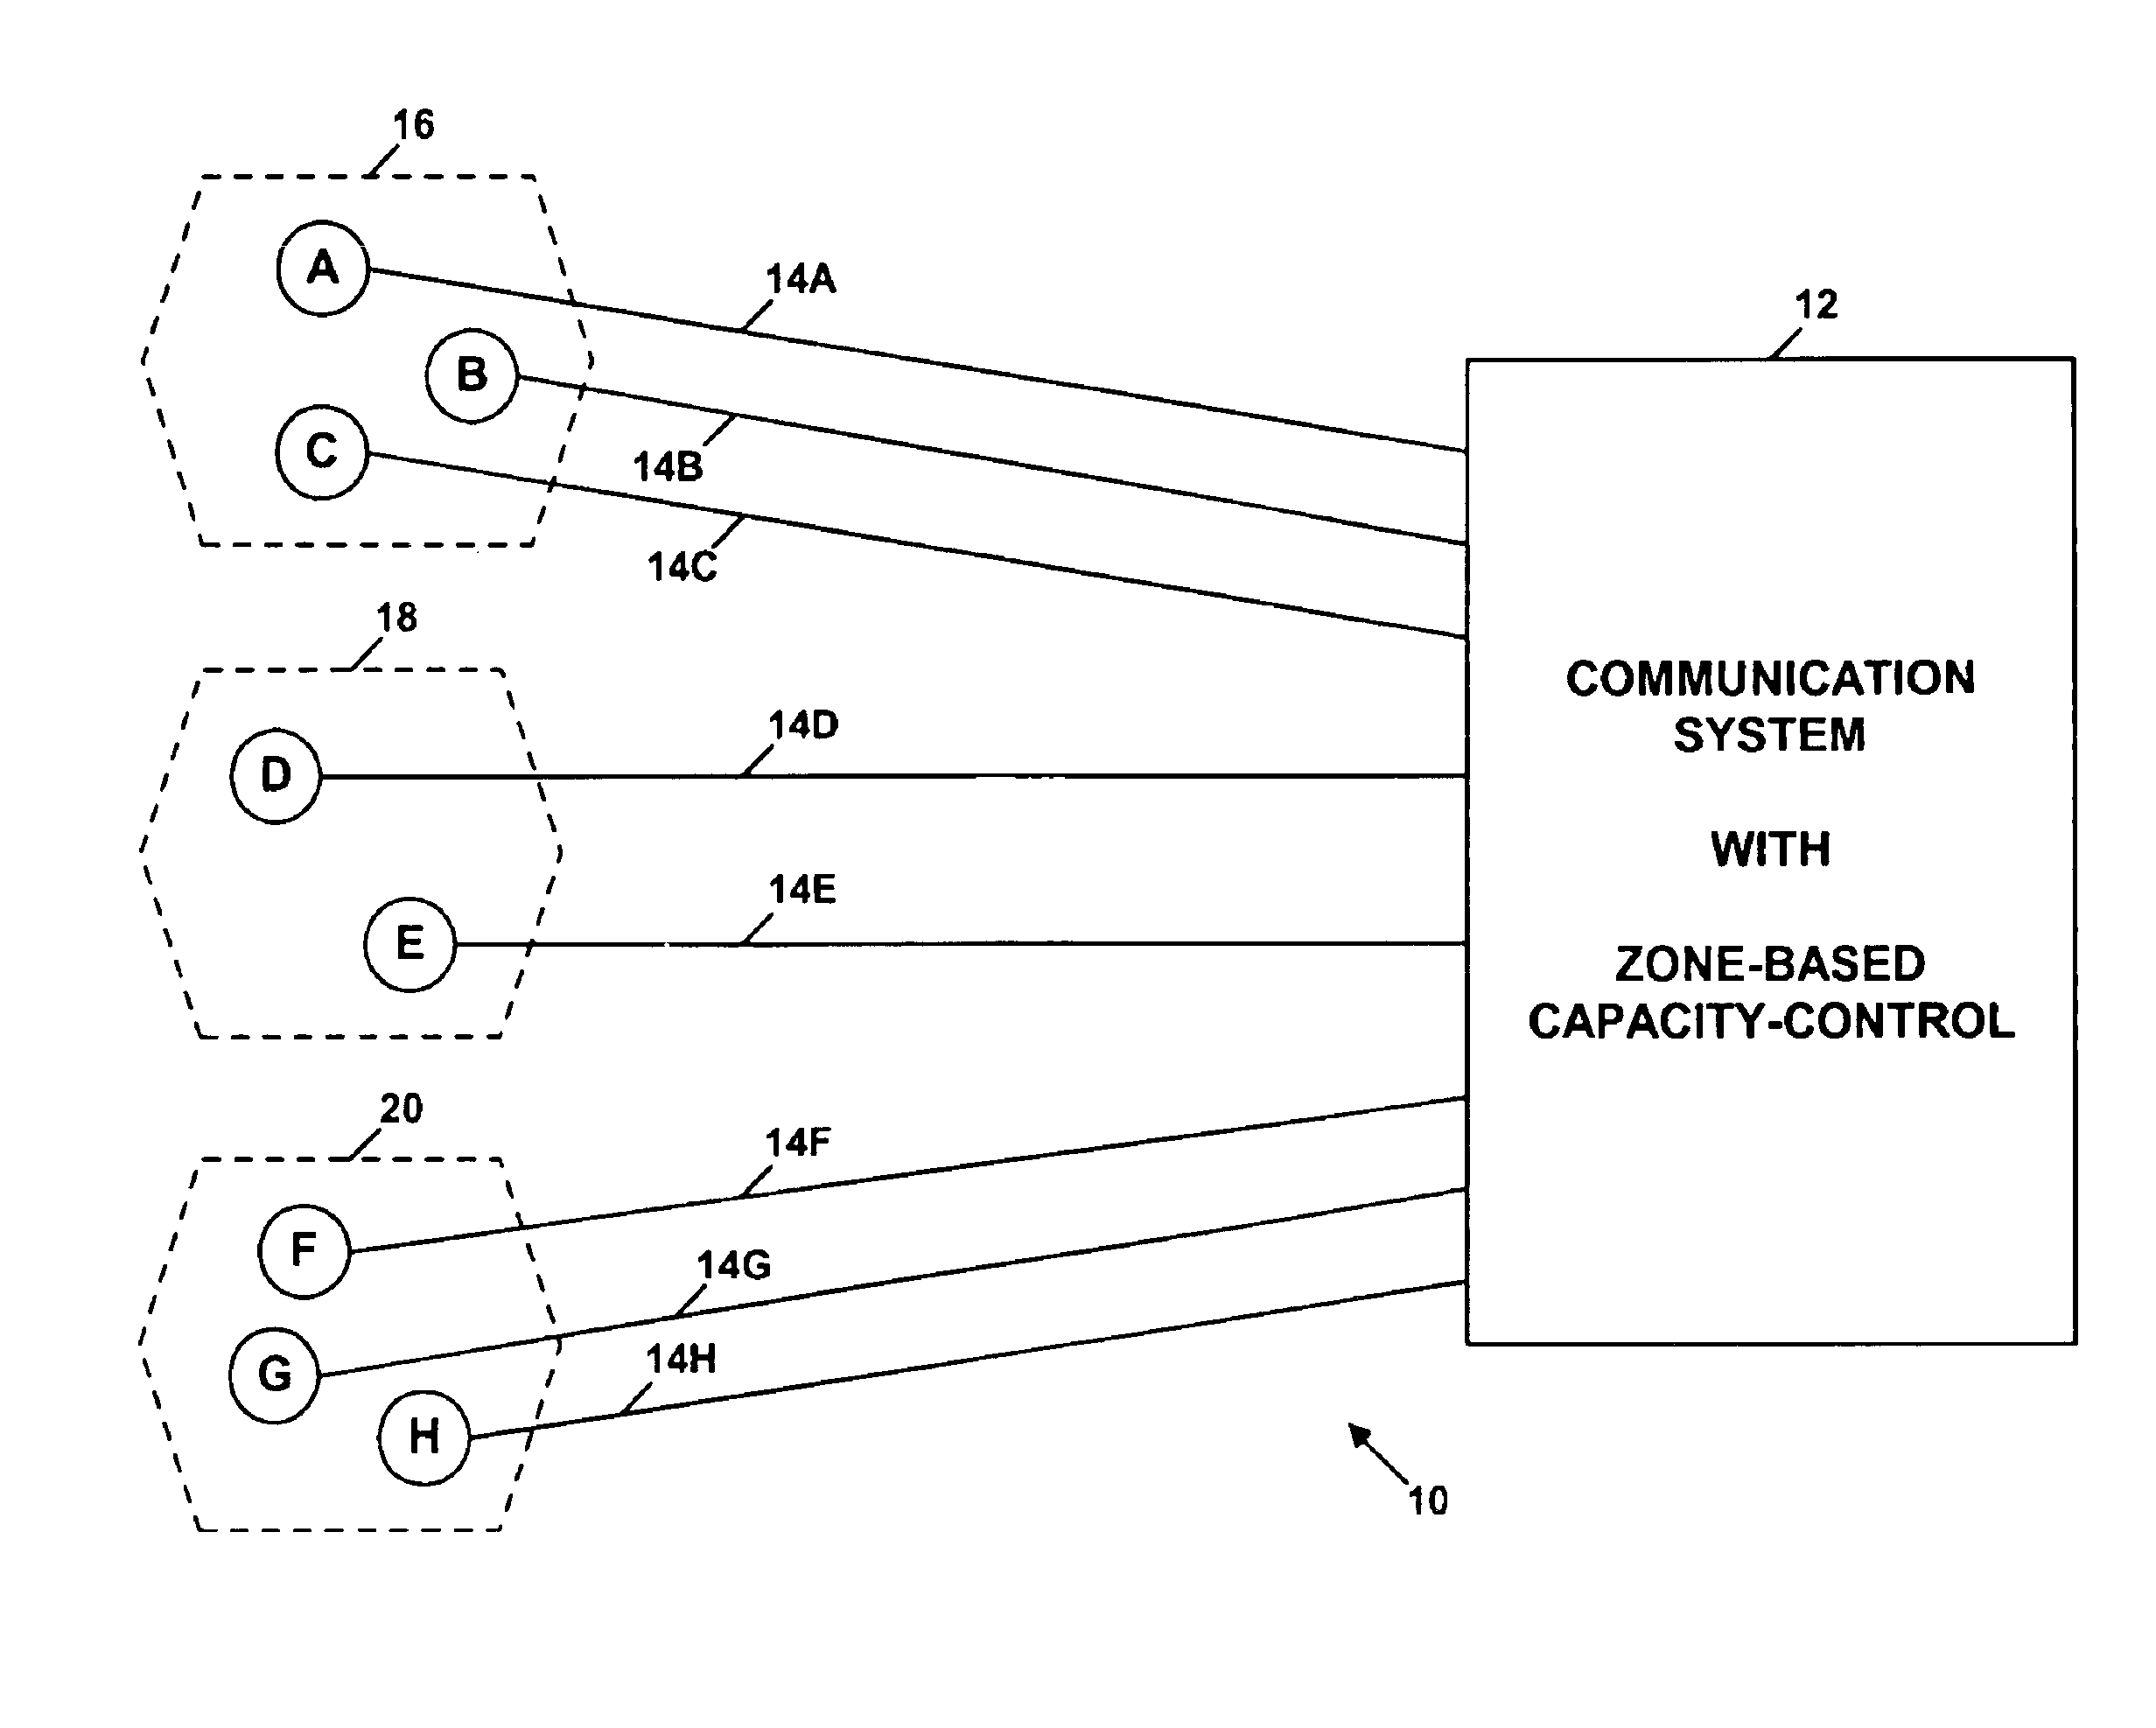 Method and system for zone-based capacity control